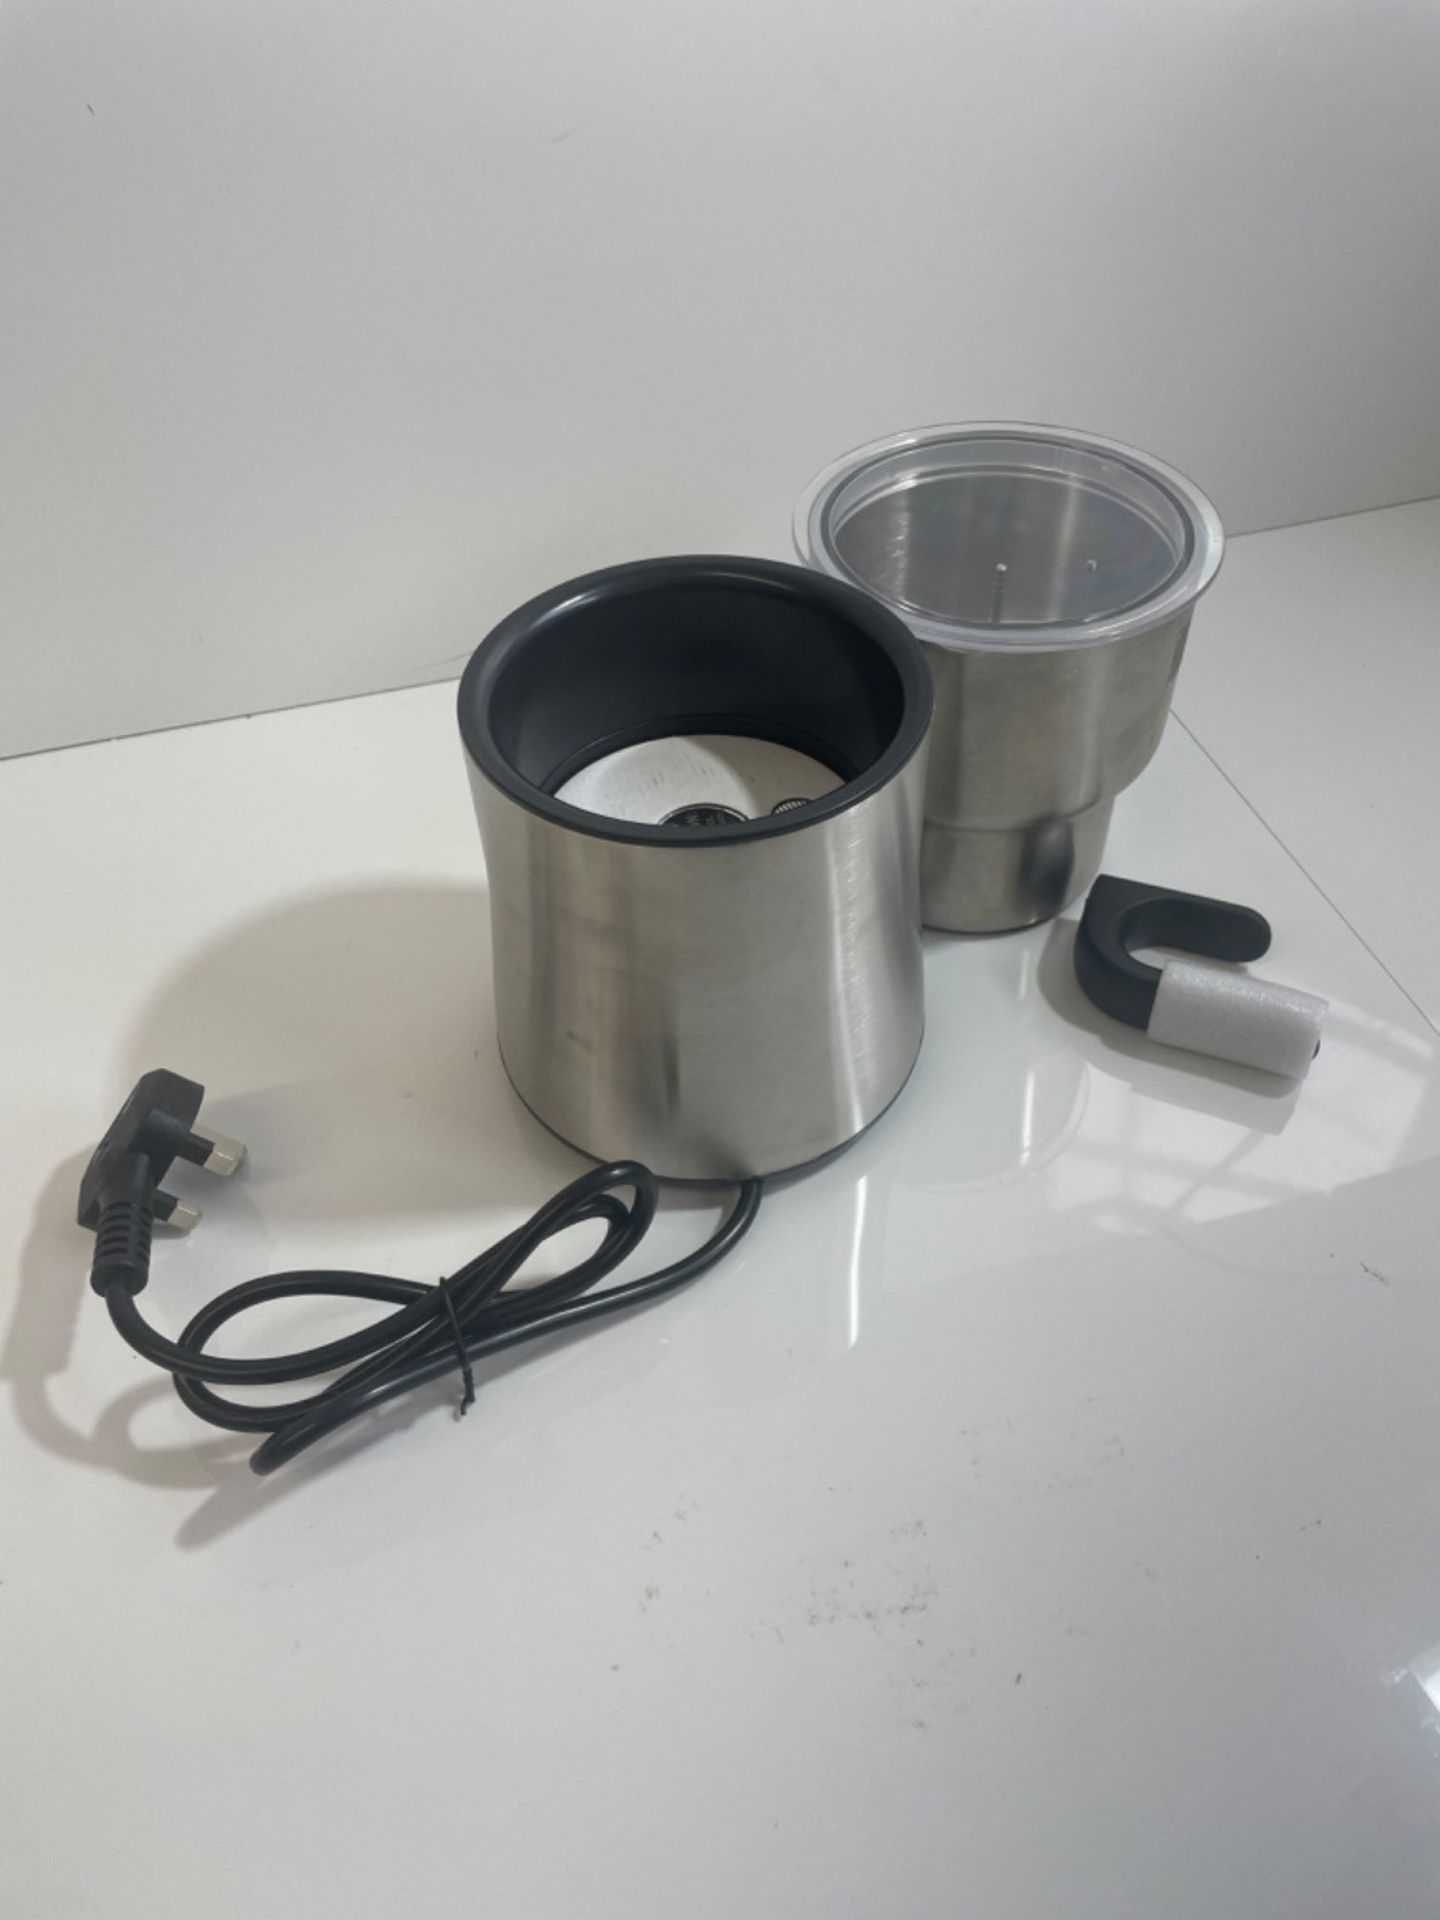 Detachable Milk Frother Machine, PARIS RH?NE 4 in 1 Automatic Stainless Steel Milk Steamer with Ho - Image 2 of 3